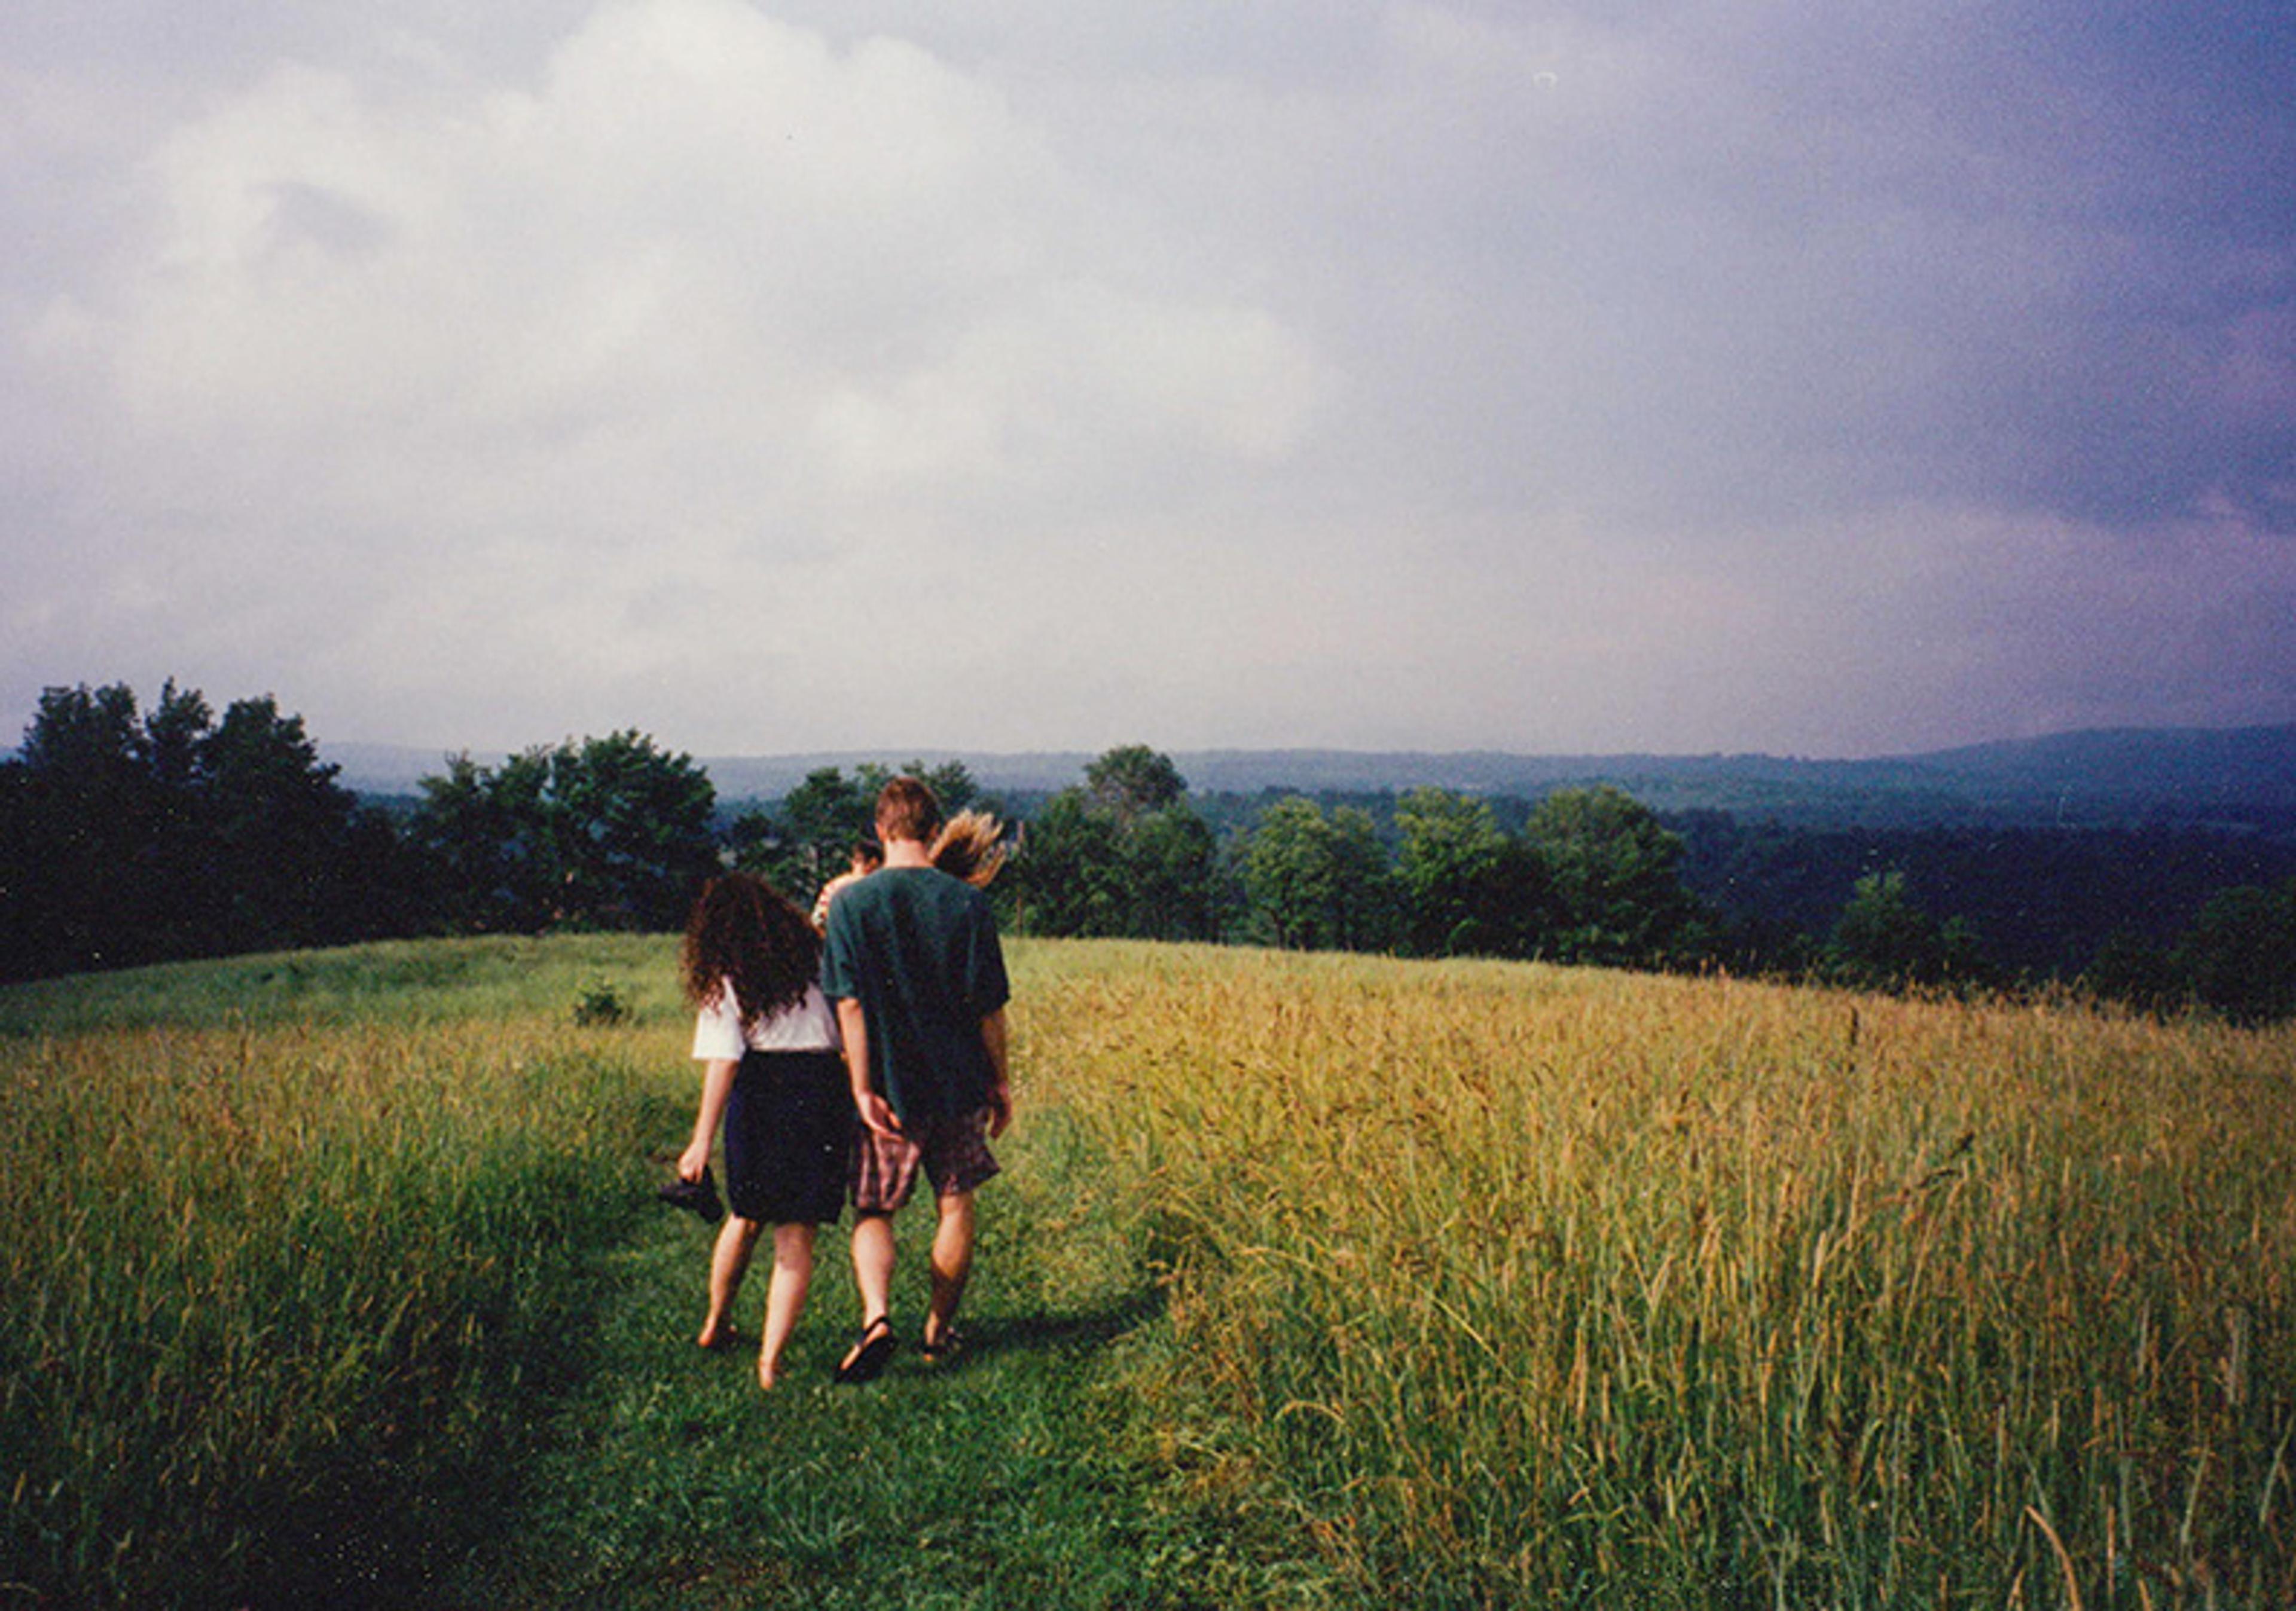 Three people walking on a path through a grassy field towards a forest under a cloudy sky.